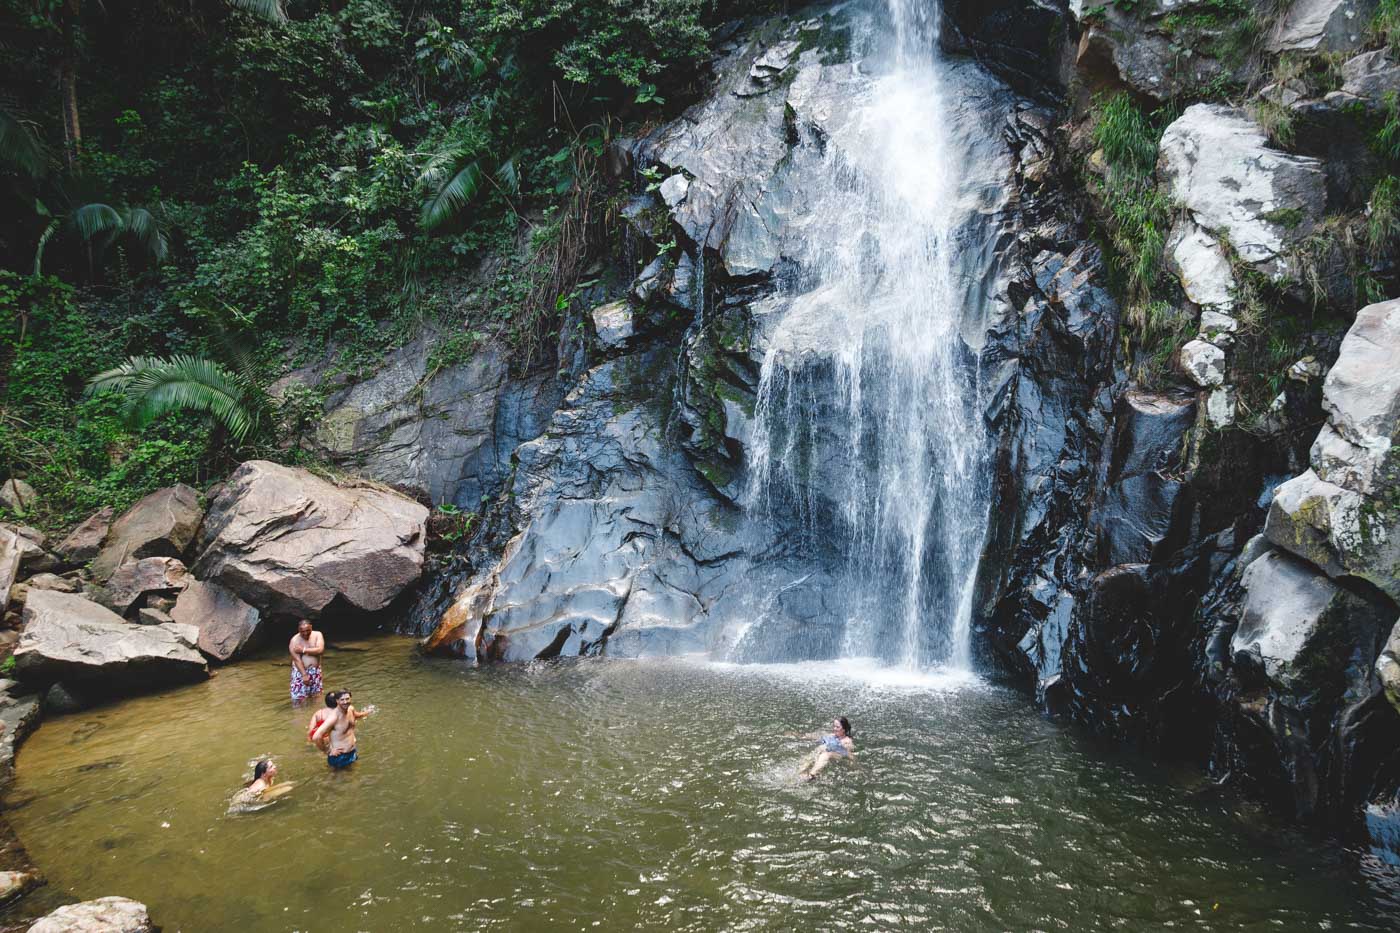 Tourists swimming in the plunge pool at the base of Yelapa Waterfall in the forest.